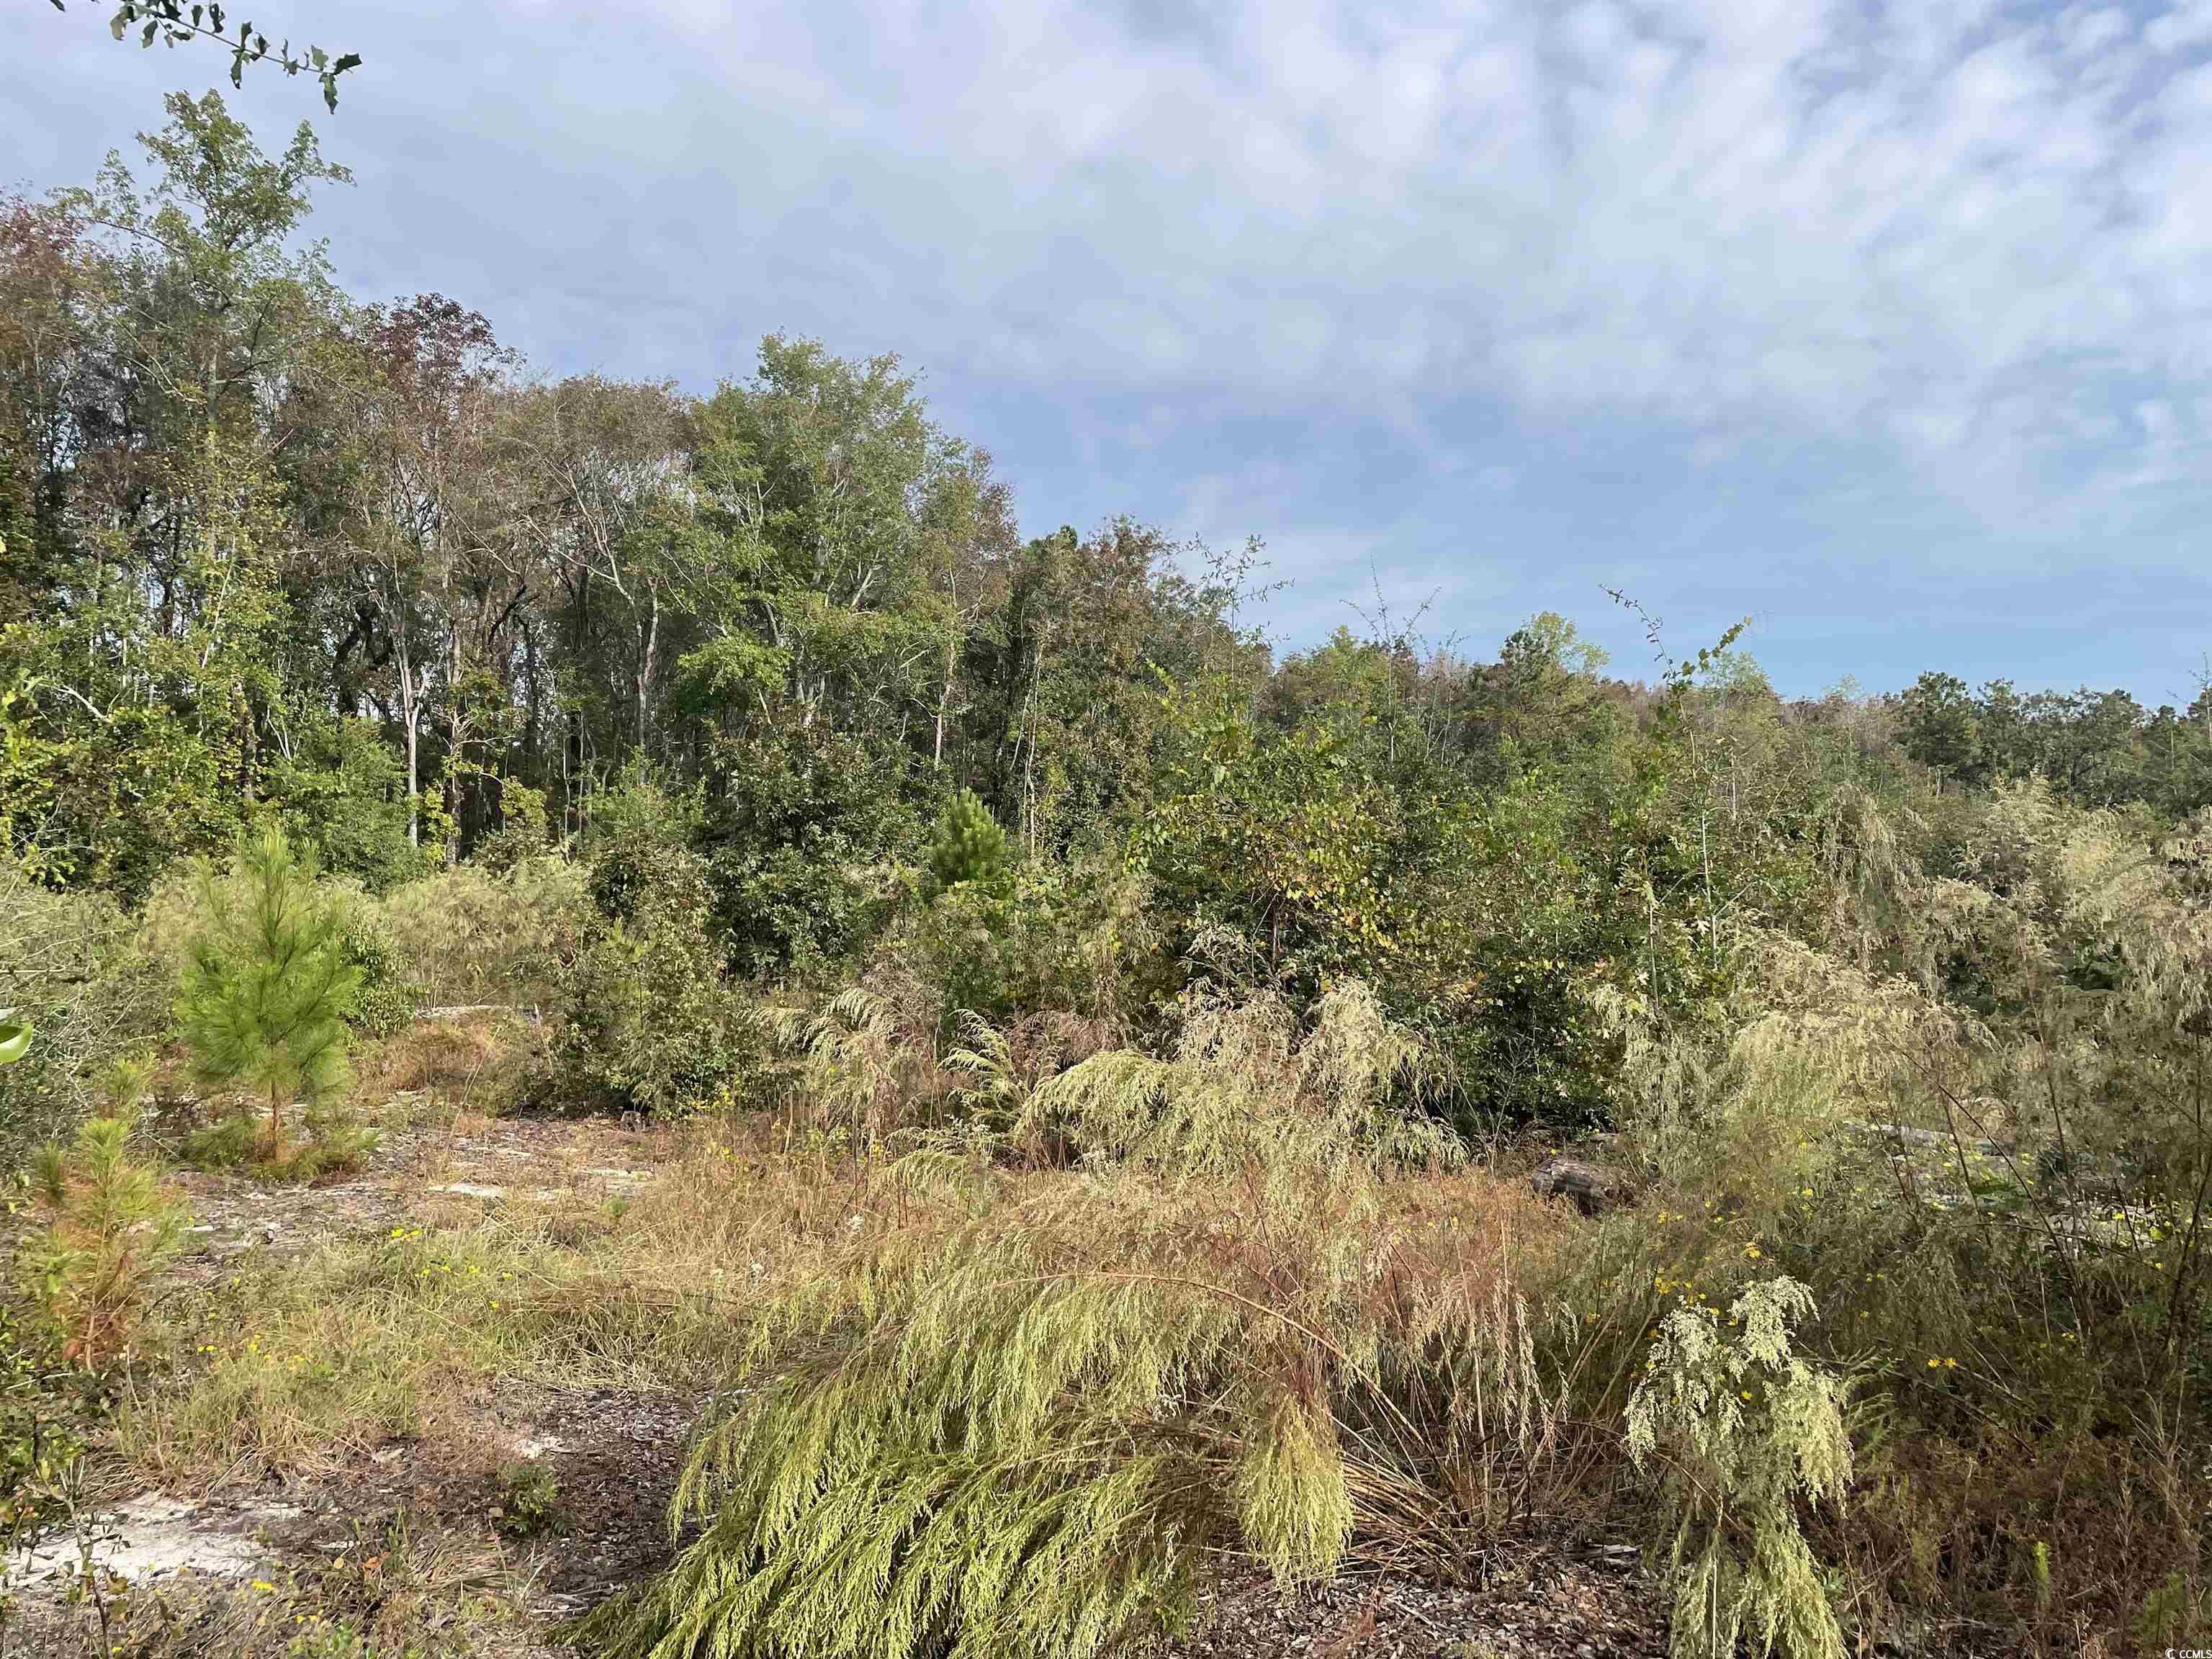 located just minutes from downtown historic georgetown, this 7.92 acres on whitehall ave. has many possibilities.  it is only 1/2 mile from the belle isle marina and yacht club, that includes access to winyah bay and the intracoastal waterway. additional acreage is available.